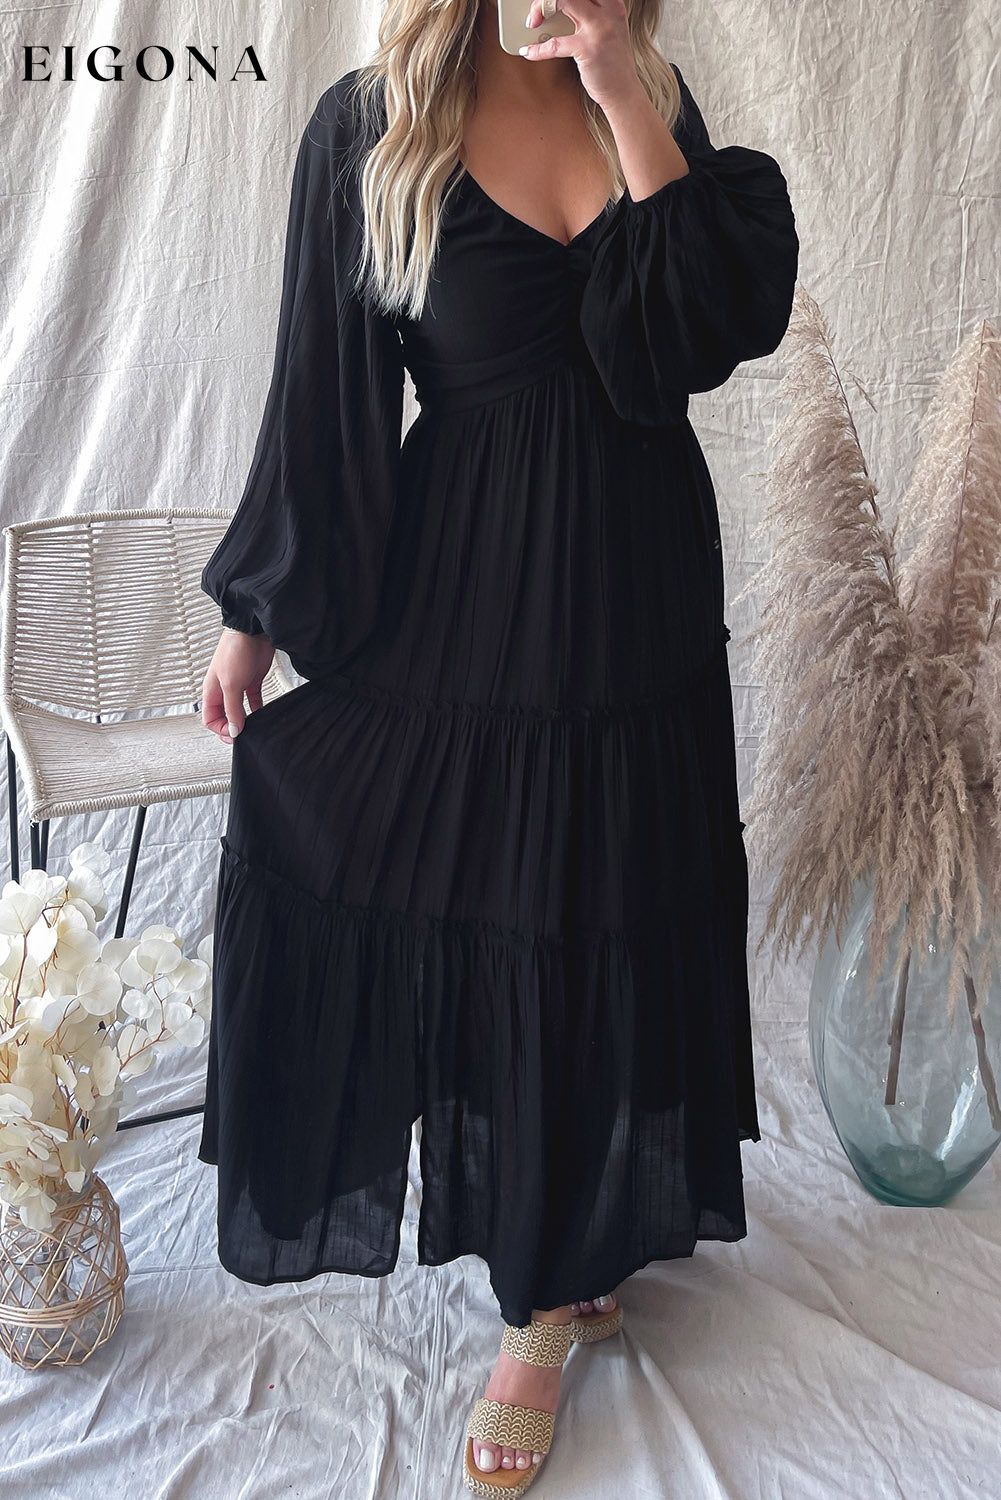 Black V Neck Bowknot Cutout Frill Tiered Maxi Dress Black 80%Viscose+20%Nylon All In Stock clothes dress dresses EDM Monthly Recomend Fabric Sheer long sleeve dress long sleeve dresses maxi dress maxi dresses Occasion Daily Print Solid Color Season Spring Silhouette A-Line Style Southern Belle